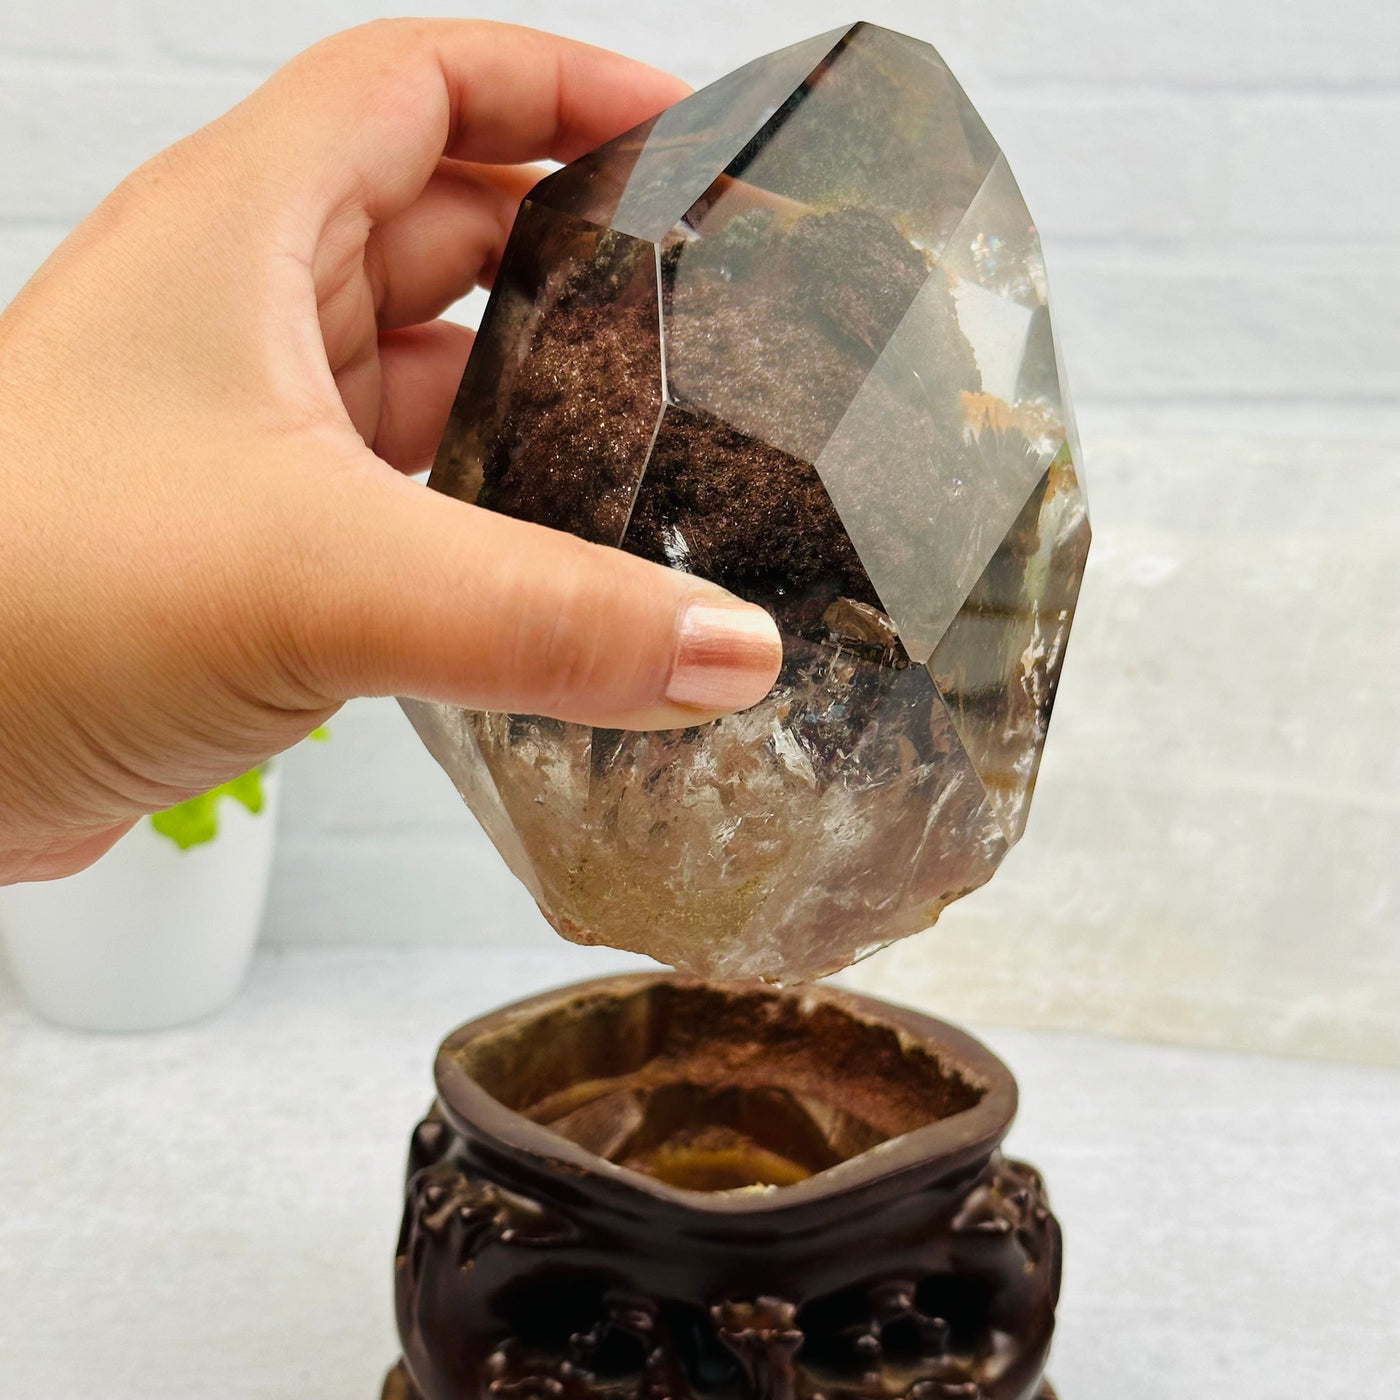 the lodolite quartz comes off of the wooden base